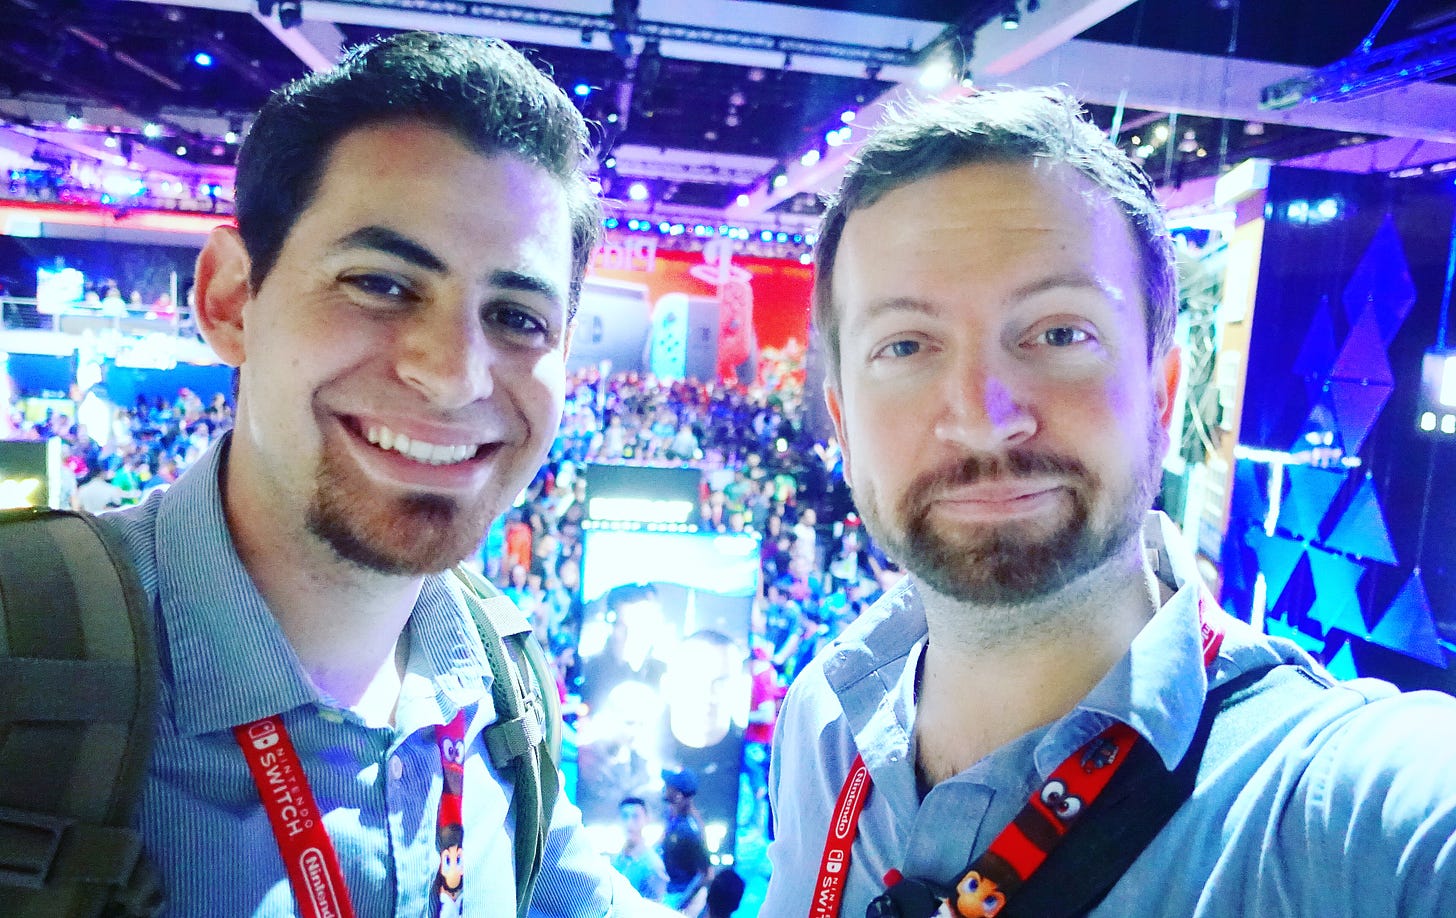 Next-gen video games owner and Matt Swider attending E3. Tons of people in the background on the show floor